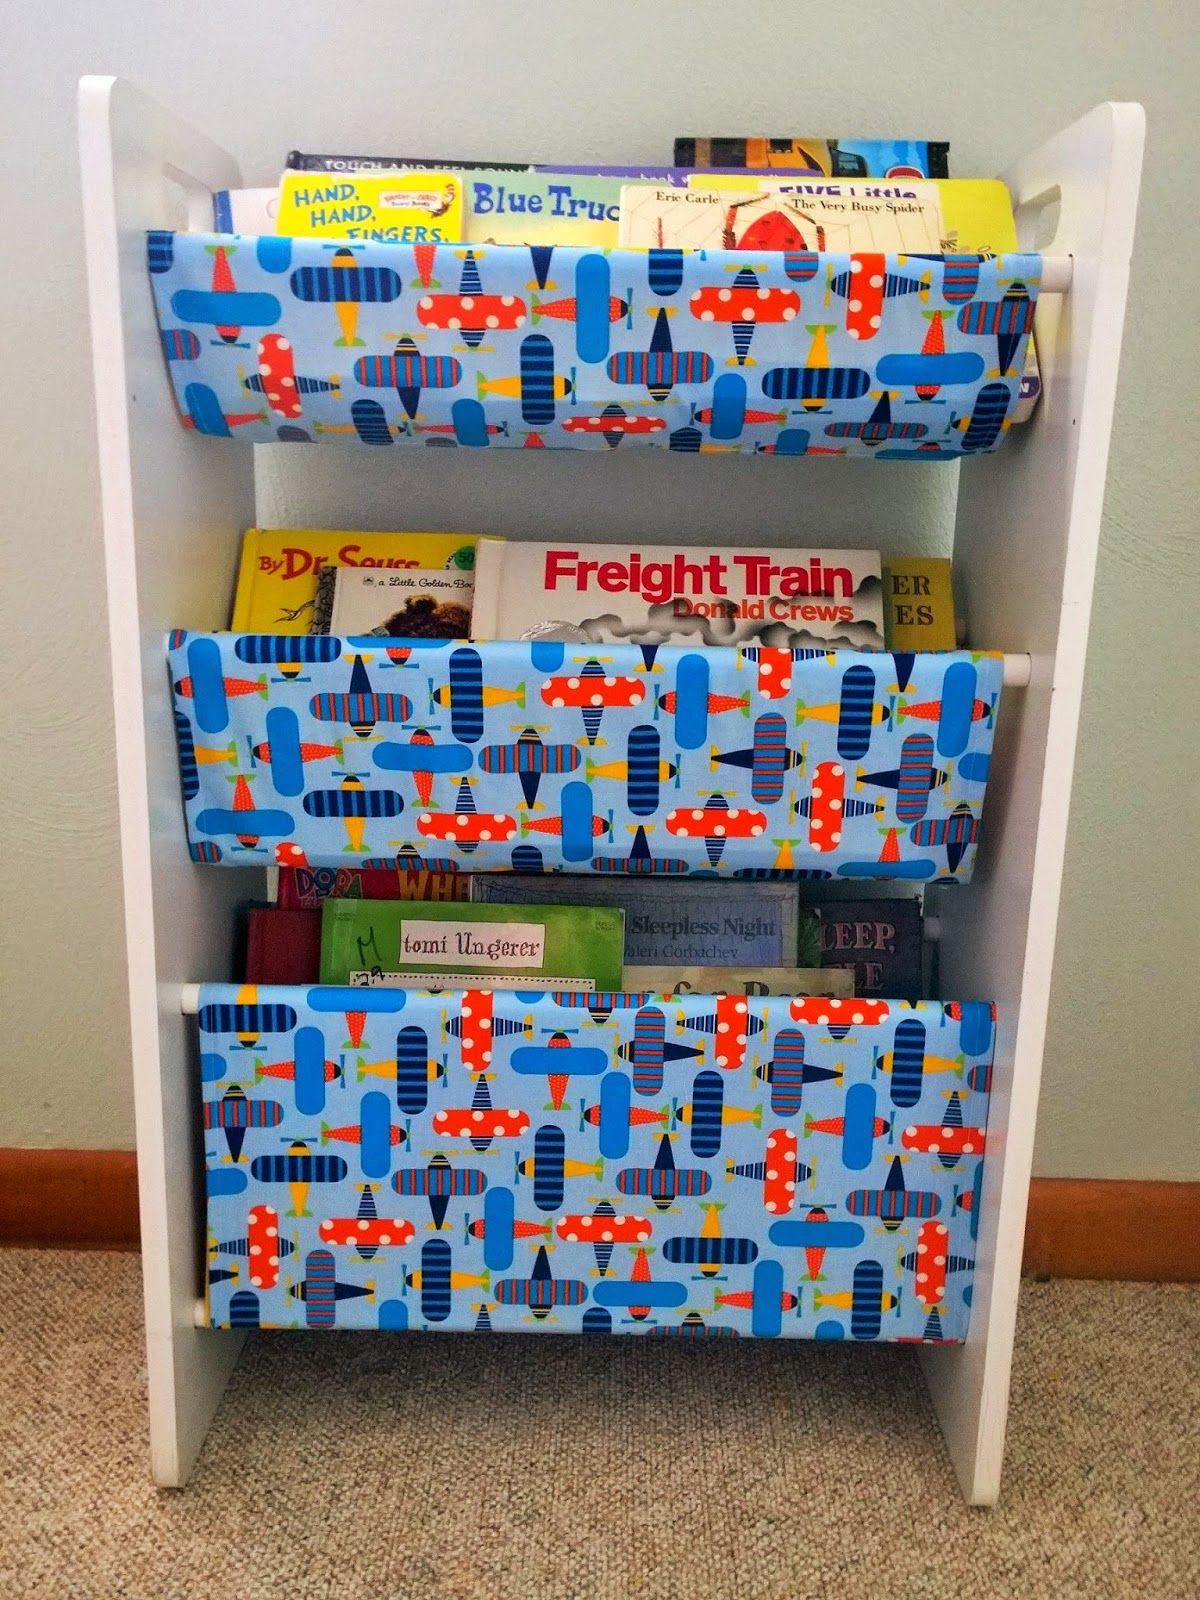 Repurpose An Old Toy Storage Bin Rack Into A Sling Book Rack within dimensions 1200 X 1600